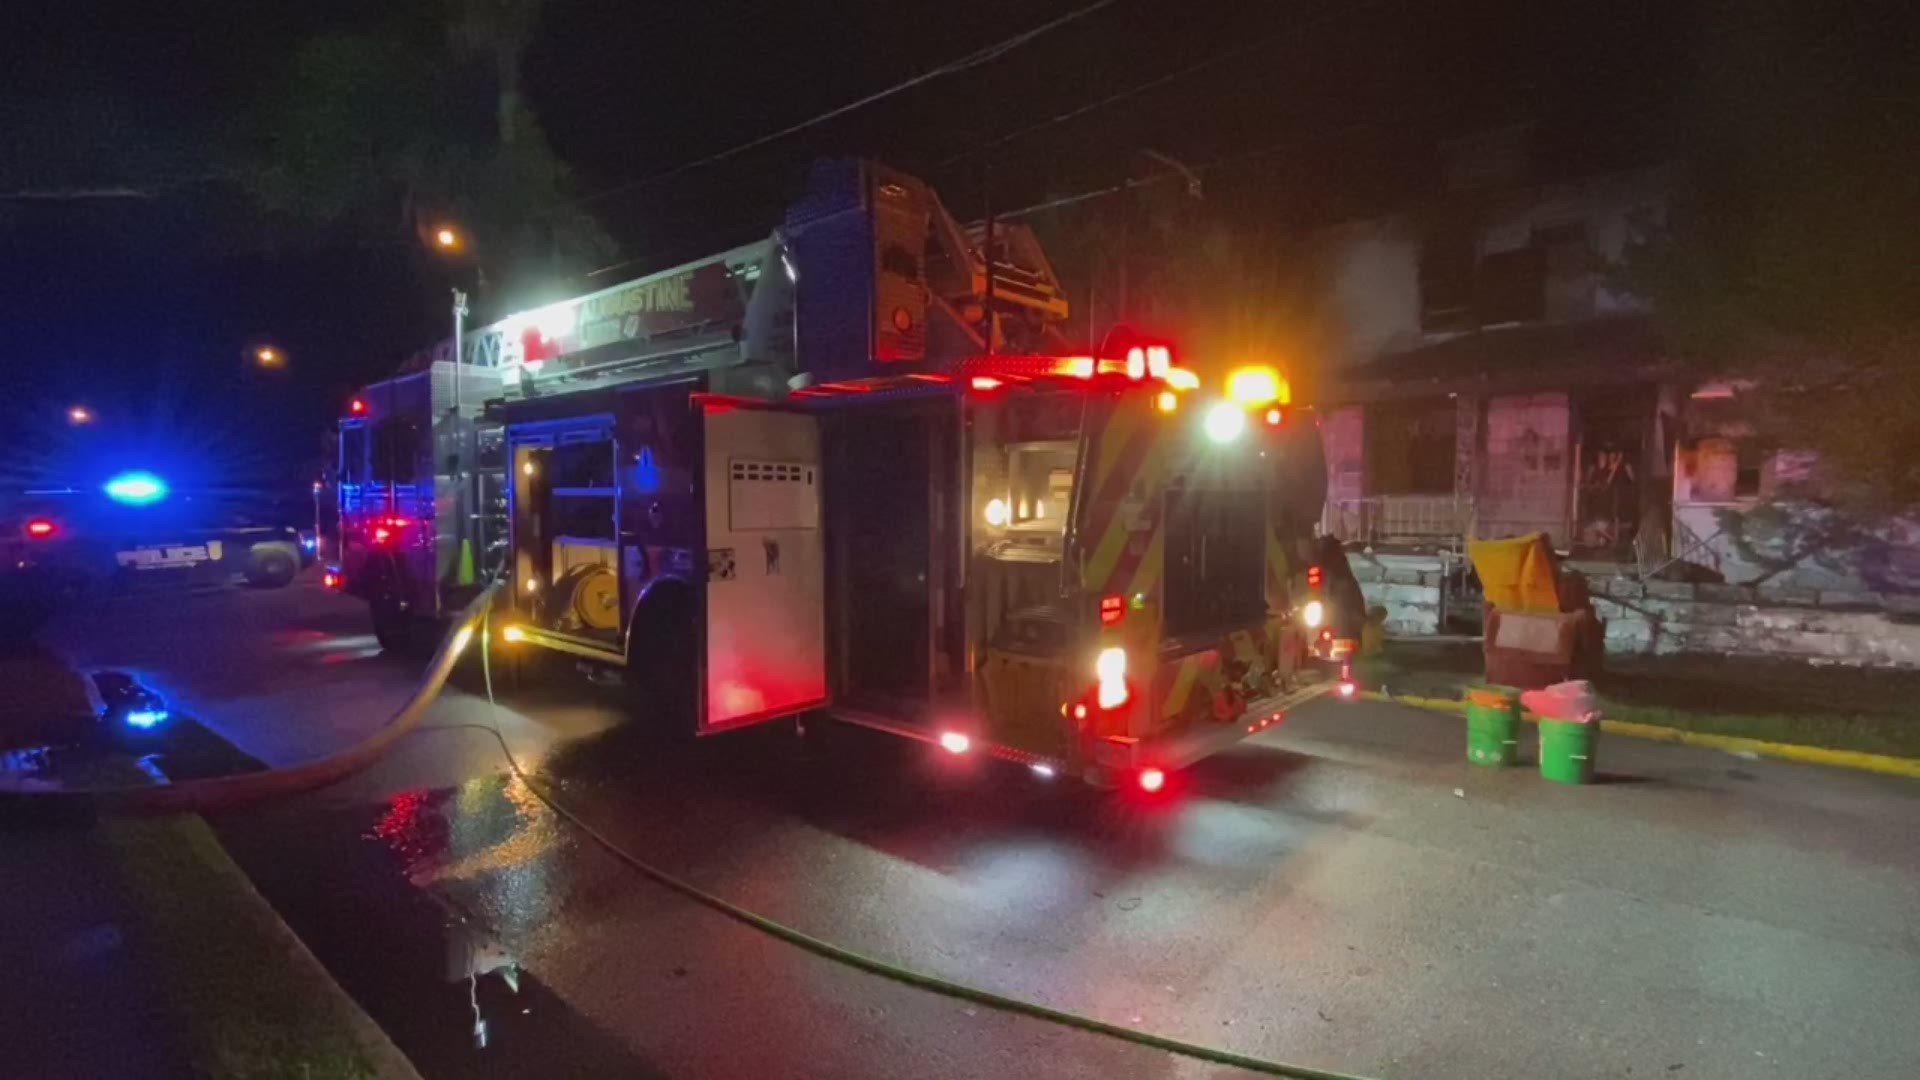 An unoccupied home caught fire Monday night in a historic St. Augustine neighborhood. No one was hurt.